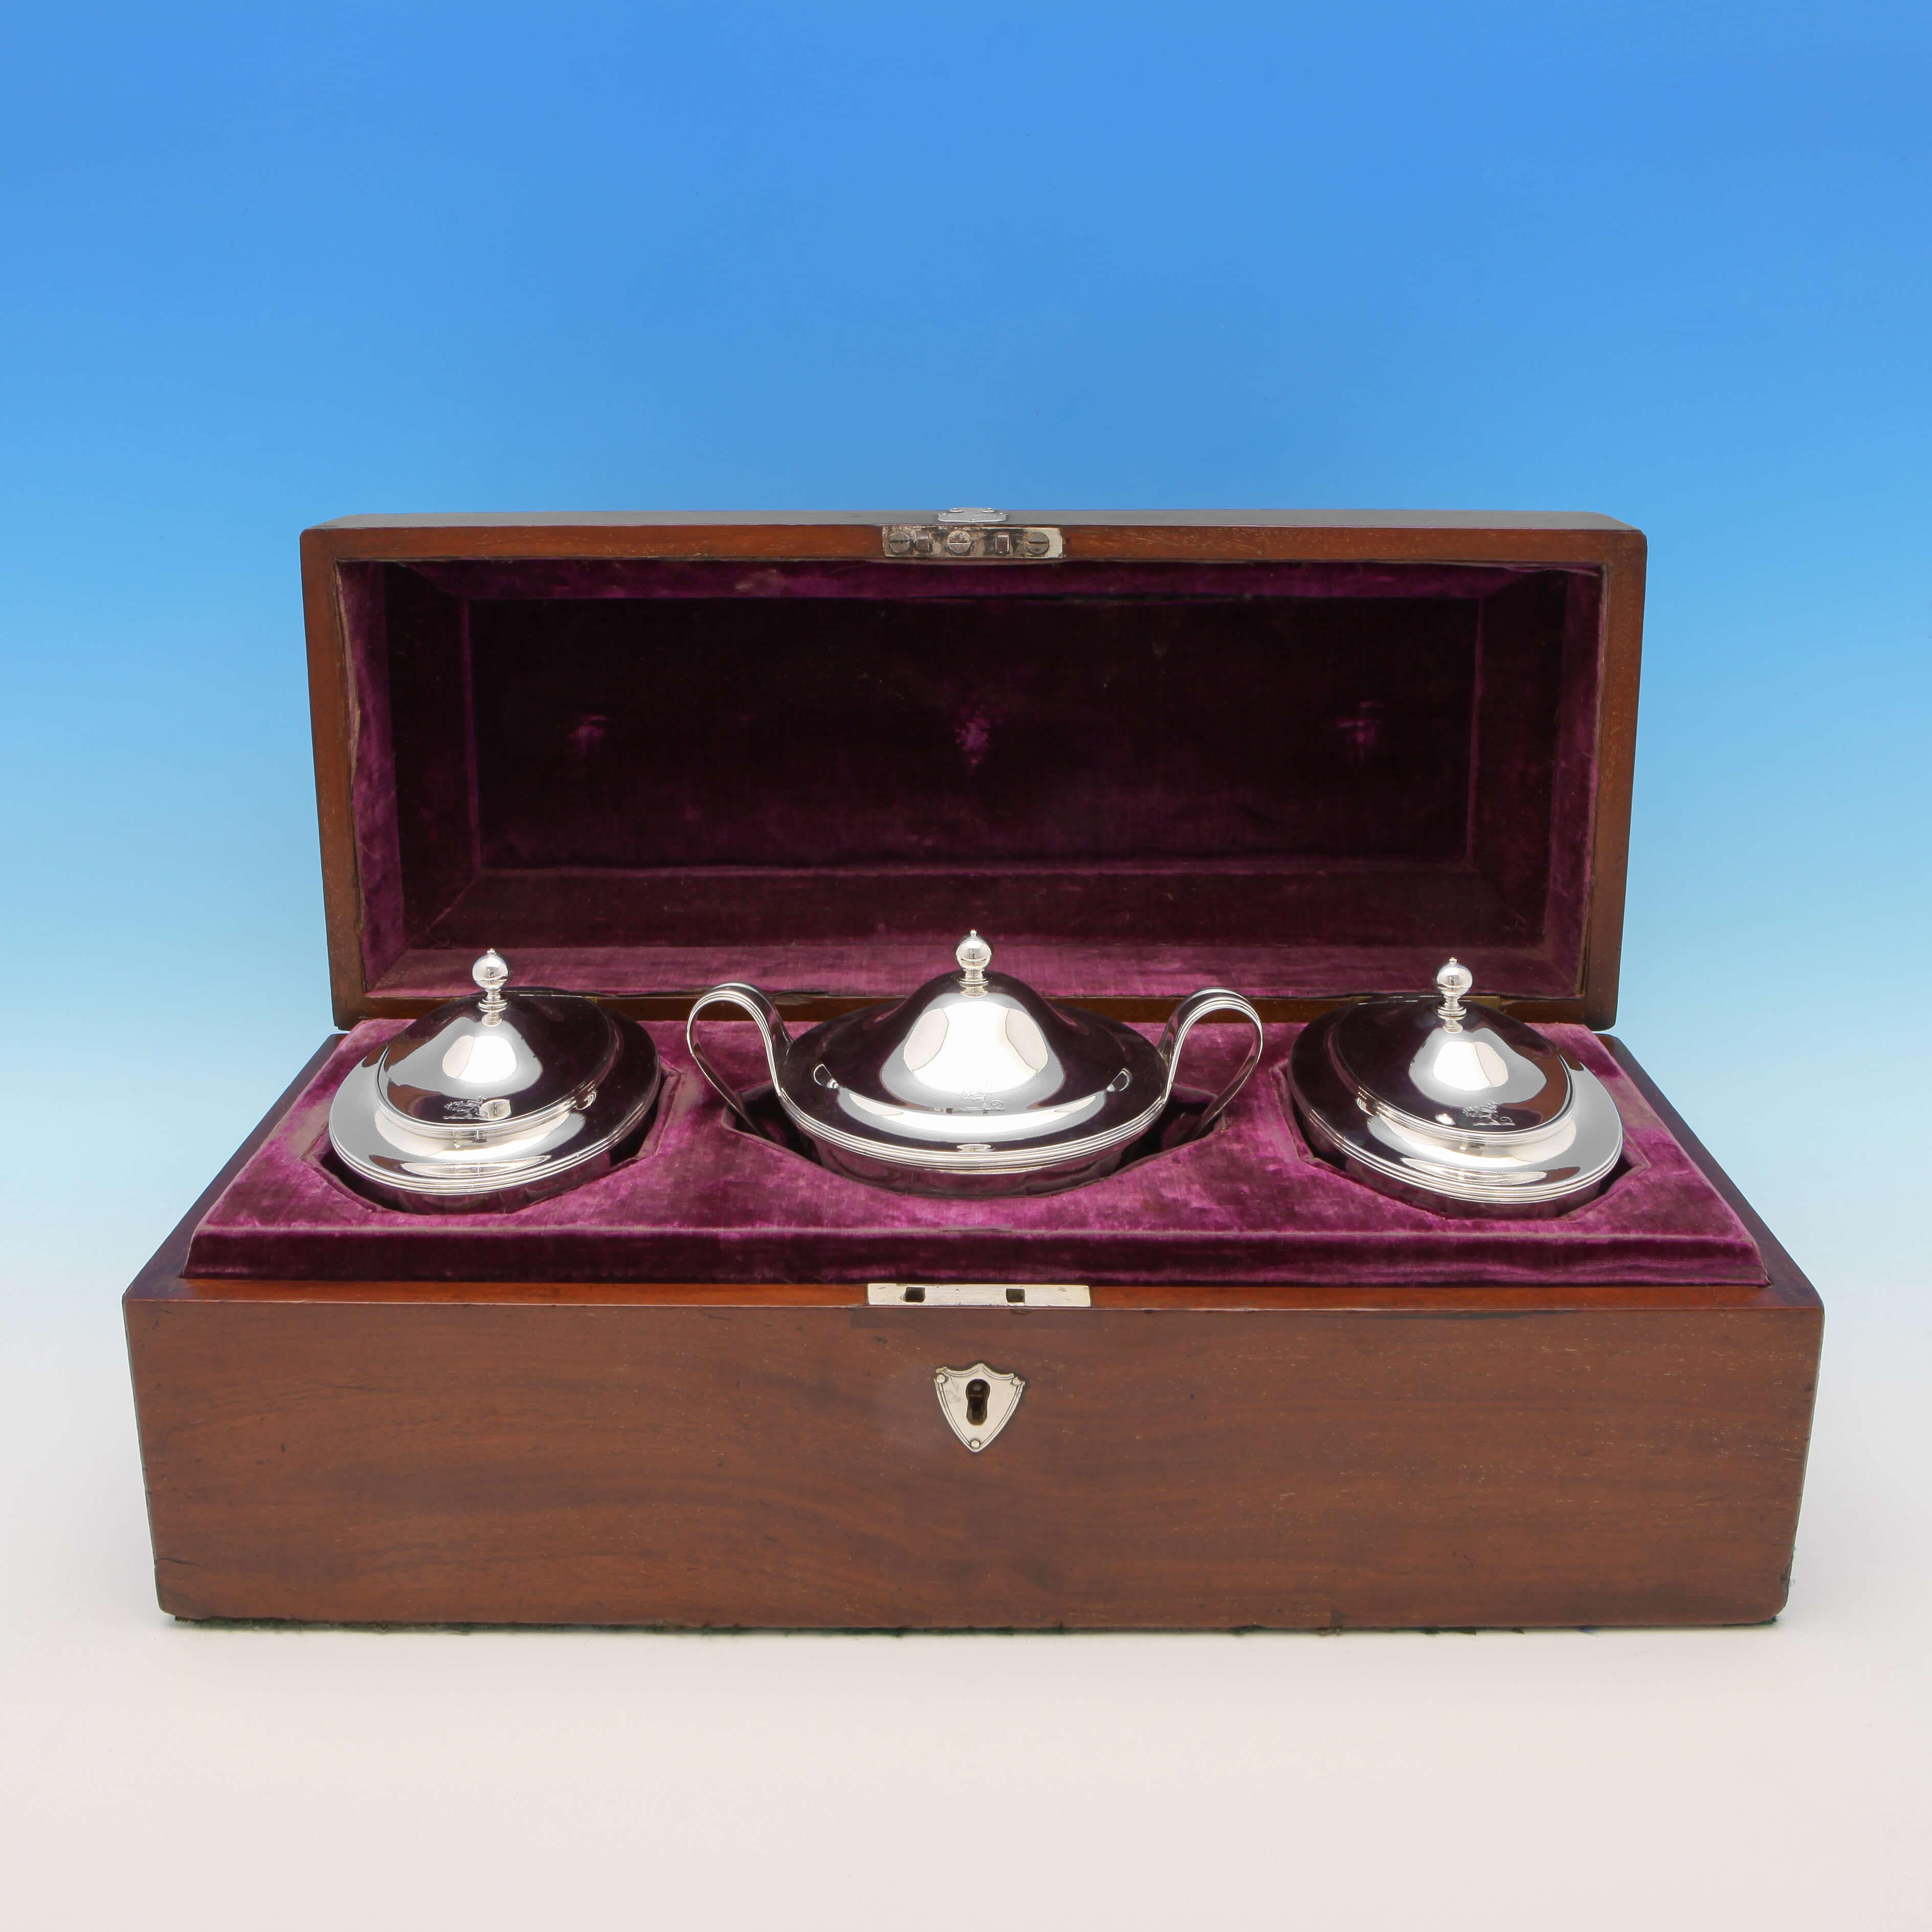 Hallmarked in London in 1797 by Robert Sharp, this rare and exceptional quality, George III, antique sterling silver tea caddy set, comprises two oval tea caddies and a sugar caddy, all presented in the original wooden box, and featuring reed